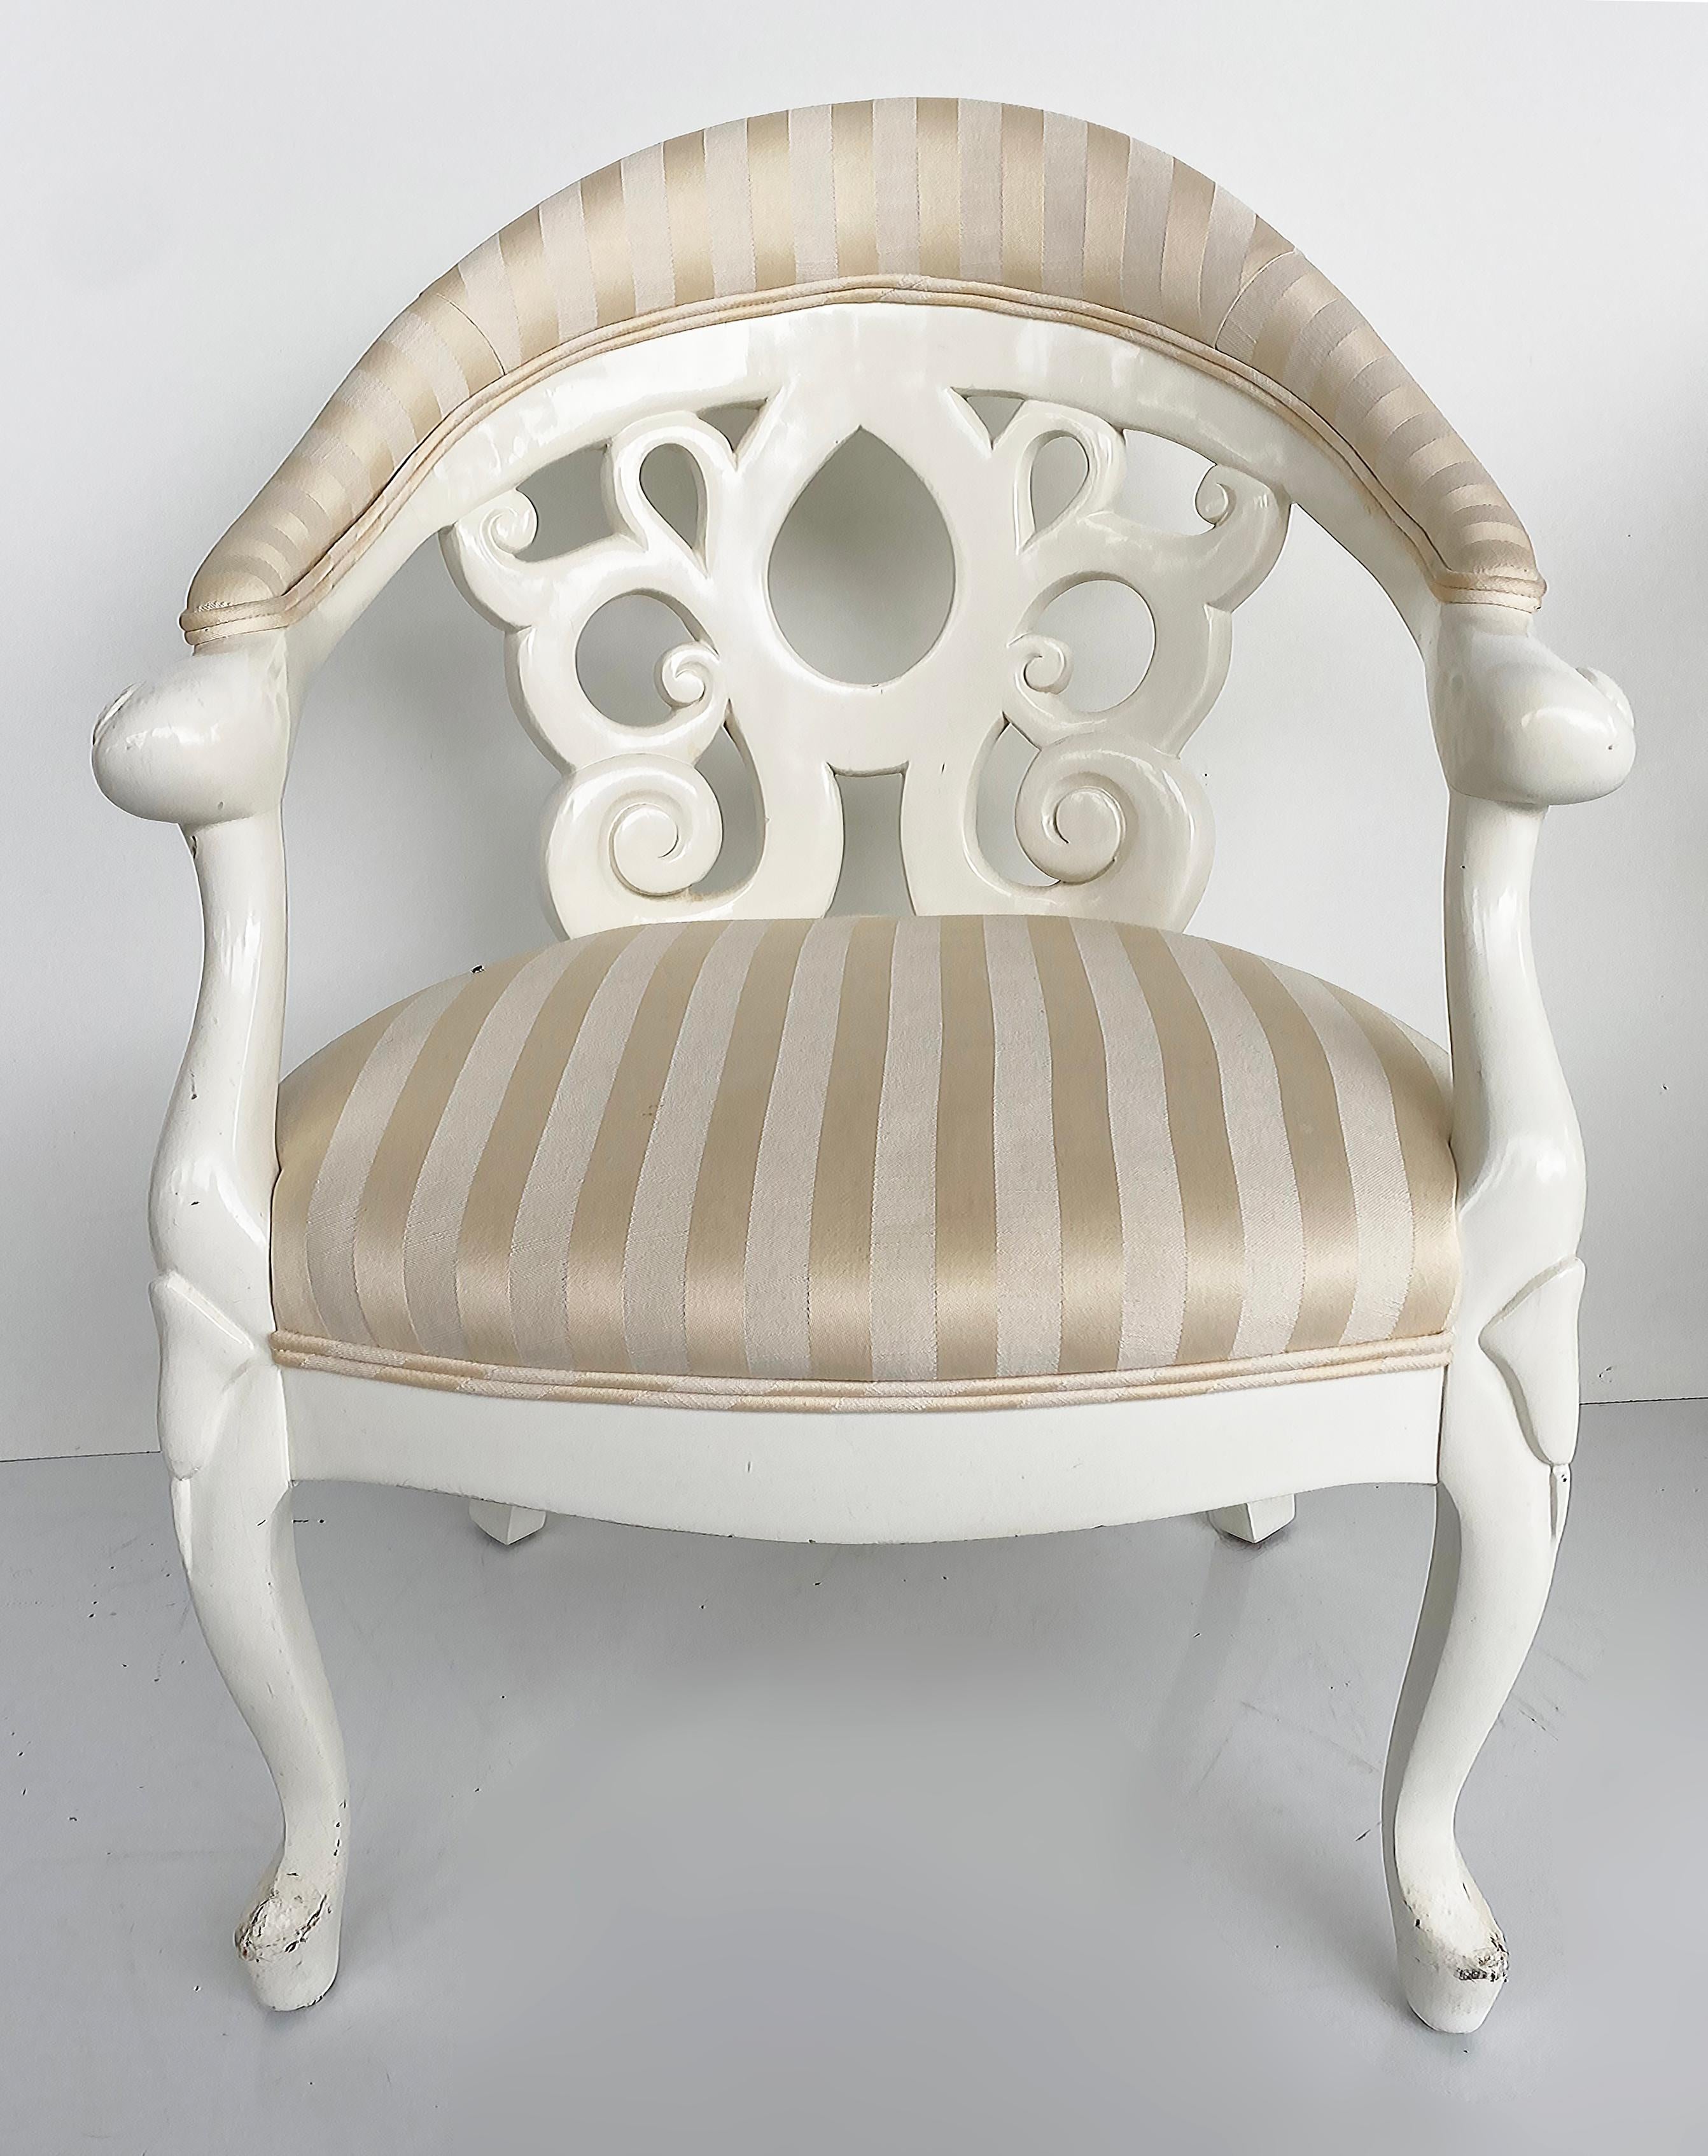 Vintage Painted David Barrett Barrel Back Armchairs, Pair

Offered for sale is a pair of late 1970s white lacquered armchairs designed by David Barrett.  Barrett, one of New York’s most in-demand decorators, rose to the top of his field, even